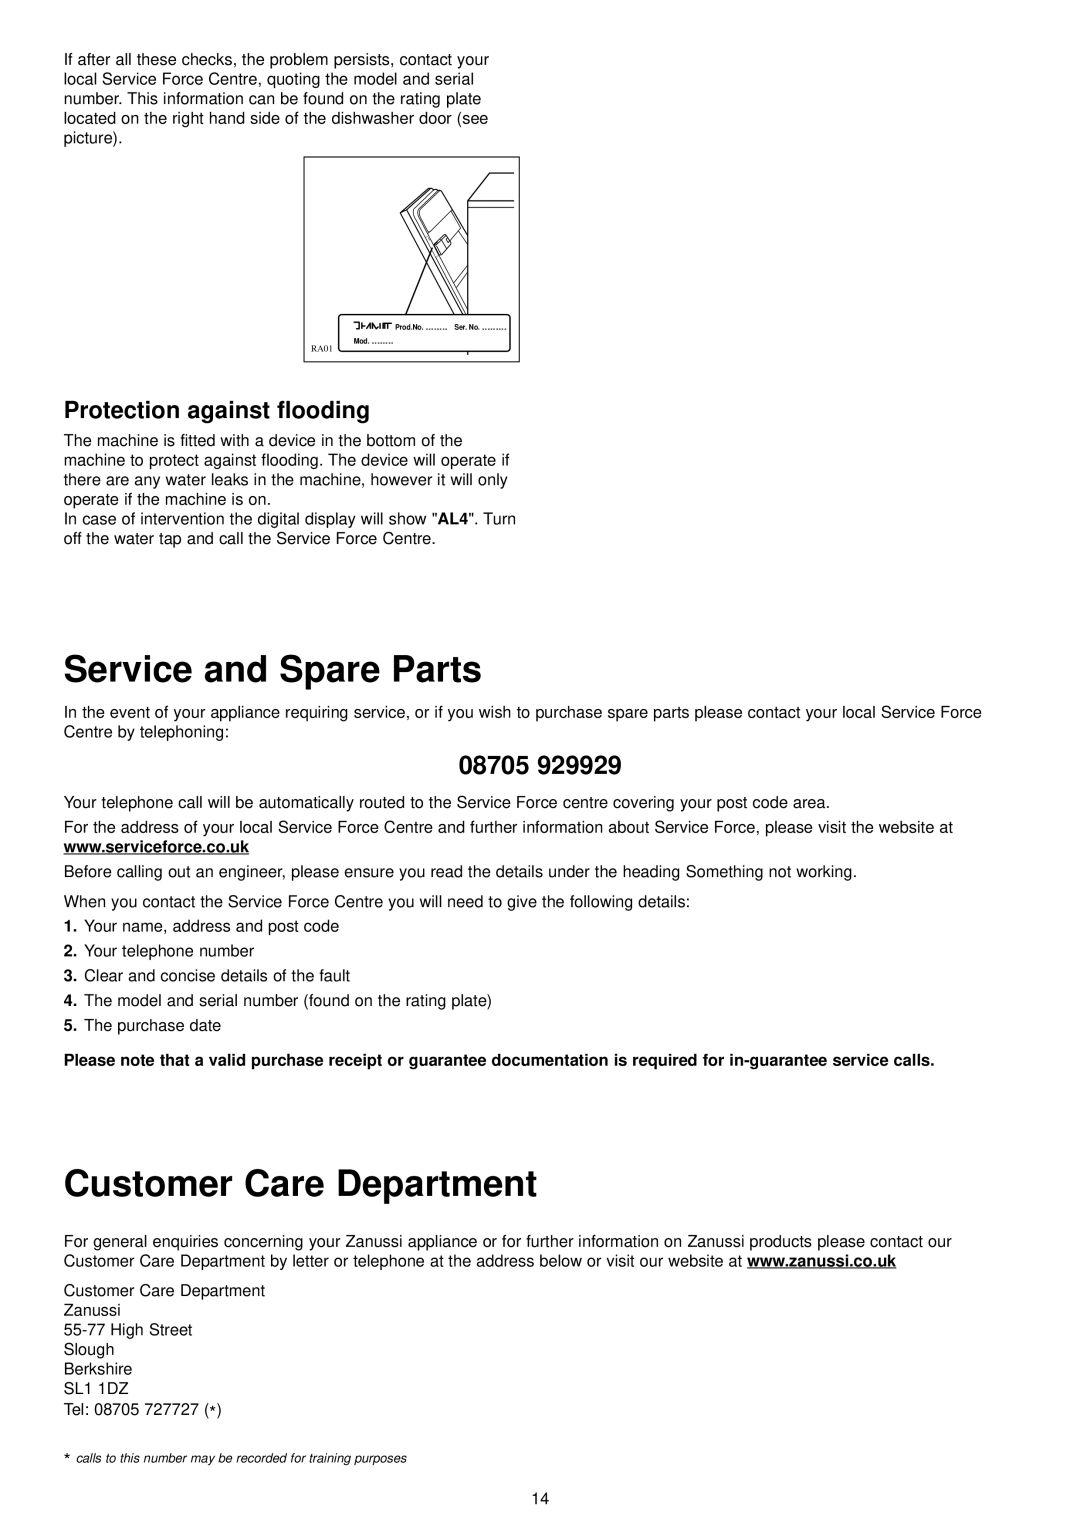 Zanussi ZDT 6894 Service and Spare Parts, Customer Care Department, Protection against flooding, zanussi.co.uk, 08705 